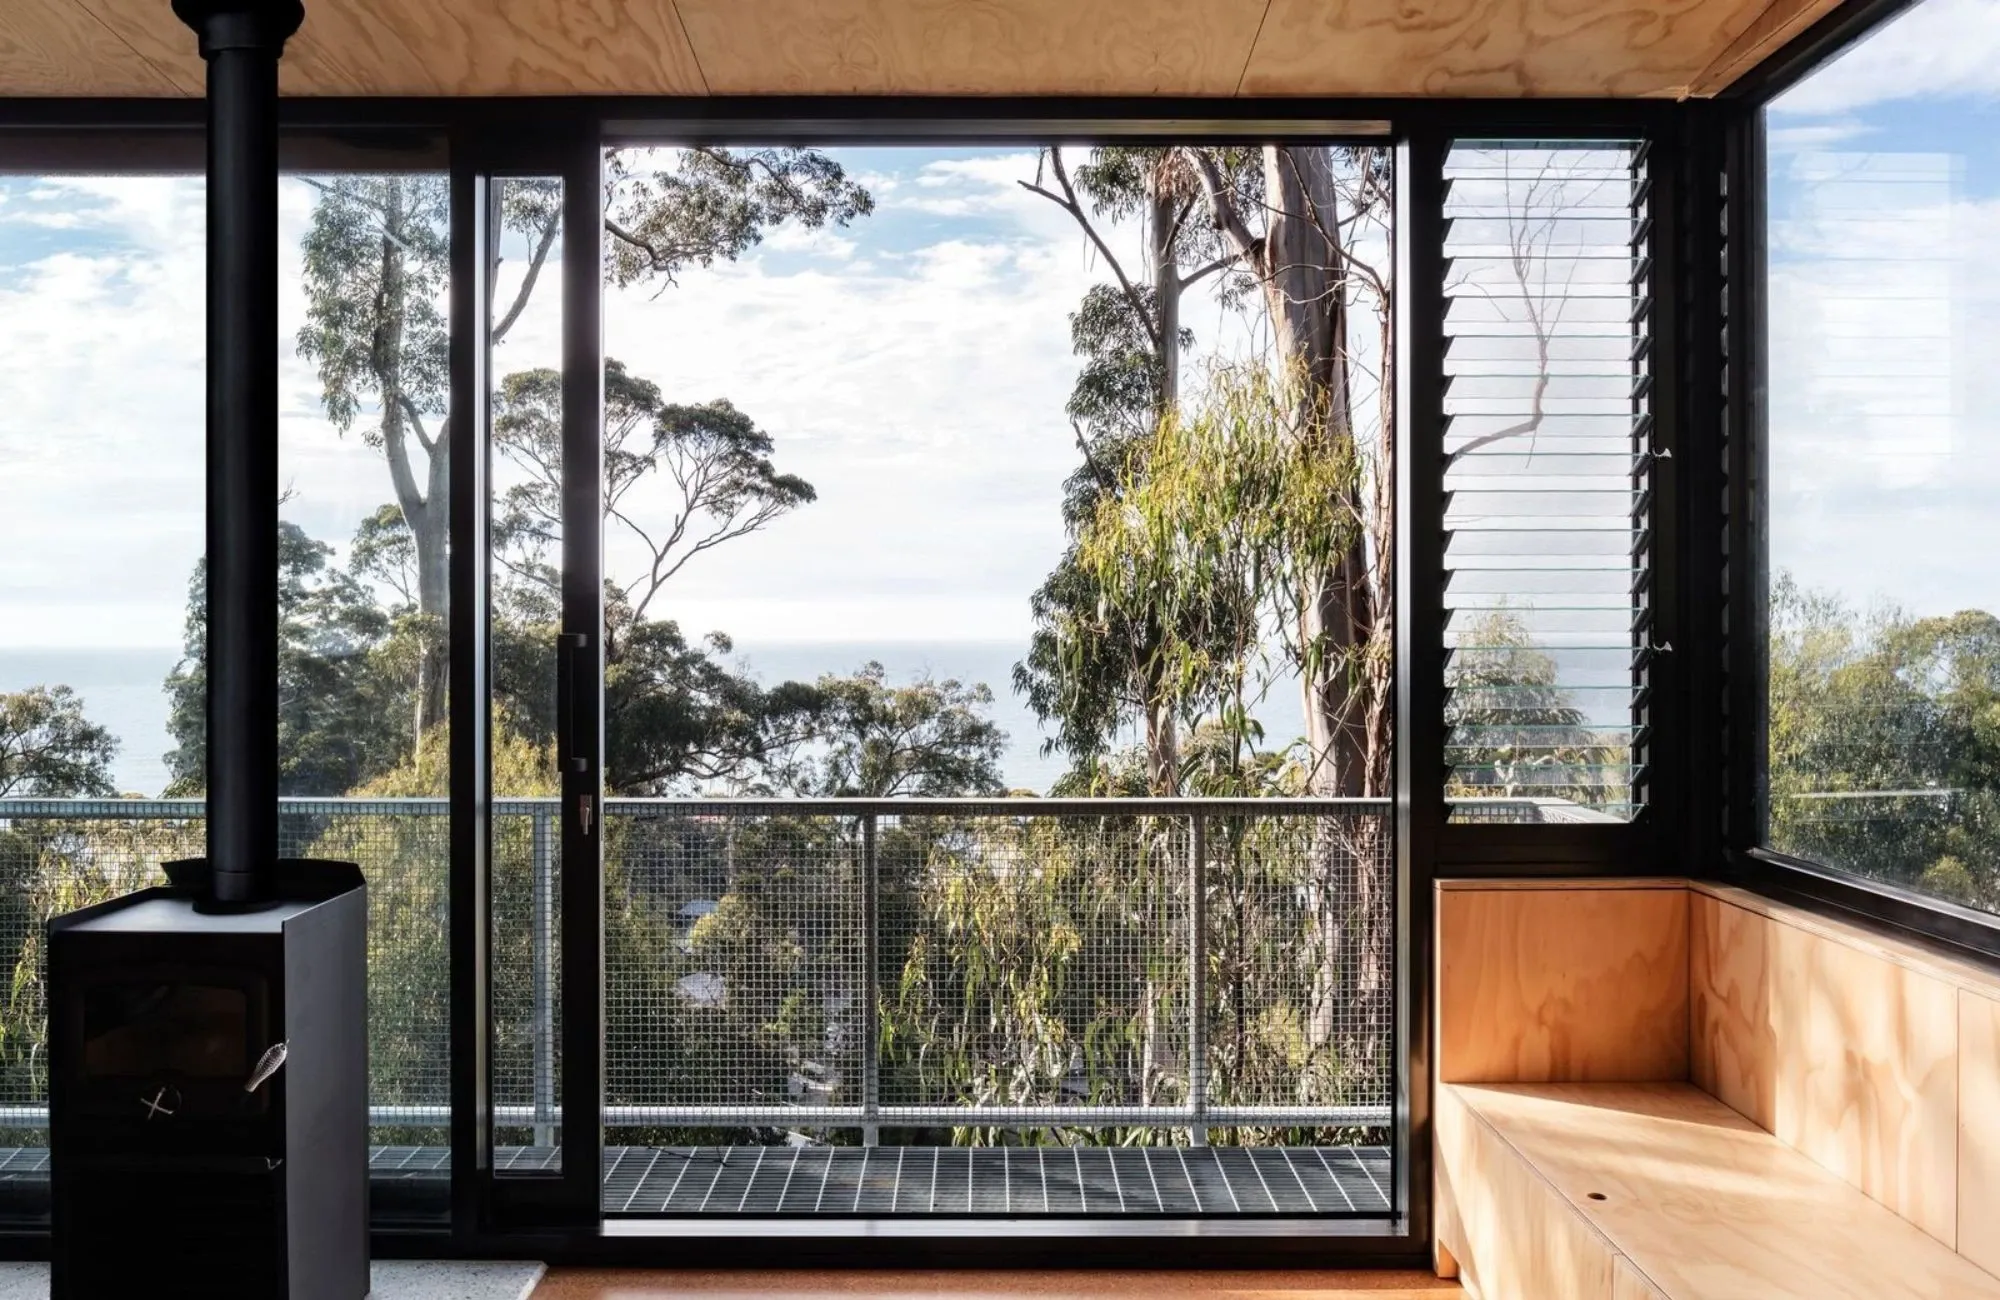 Wye River House by drw studio & Heartly. Photography by Nathan Davis